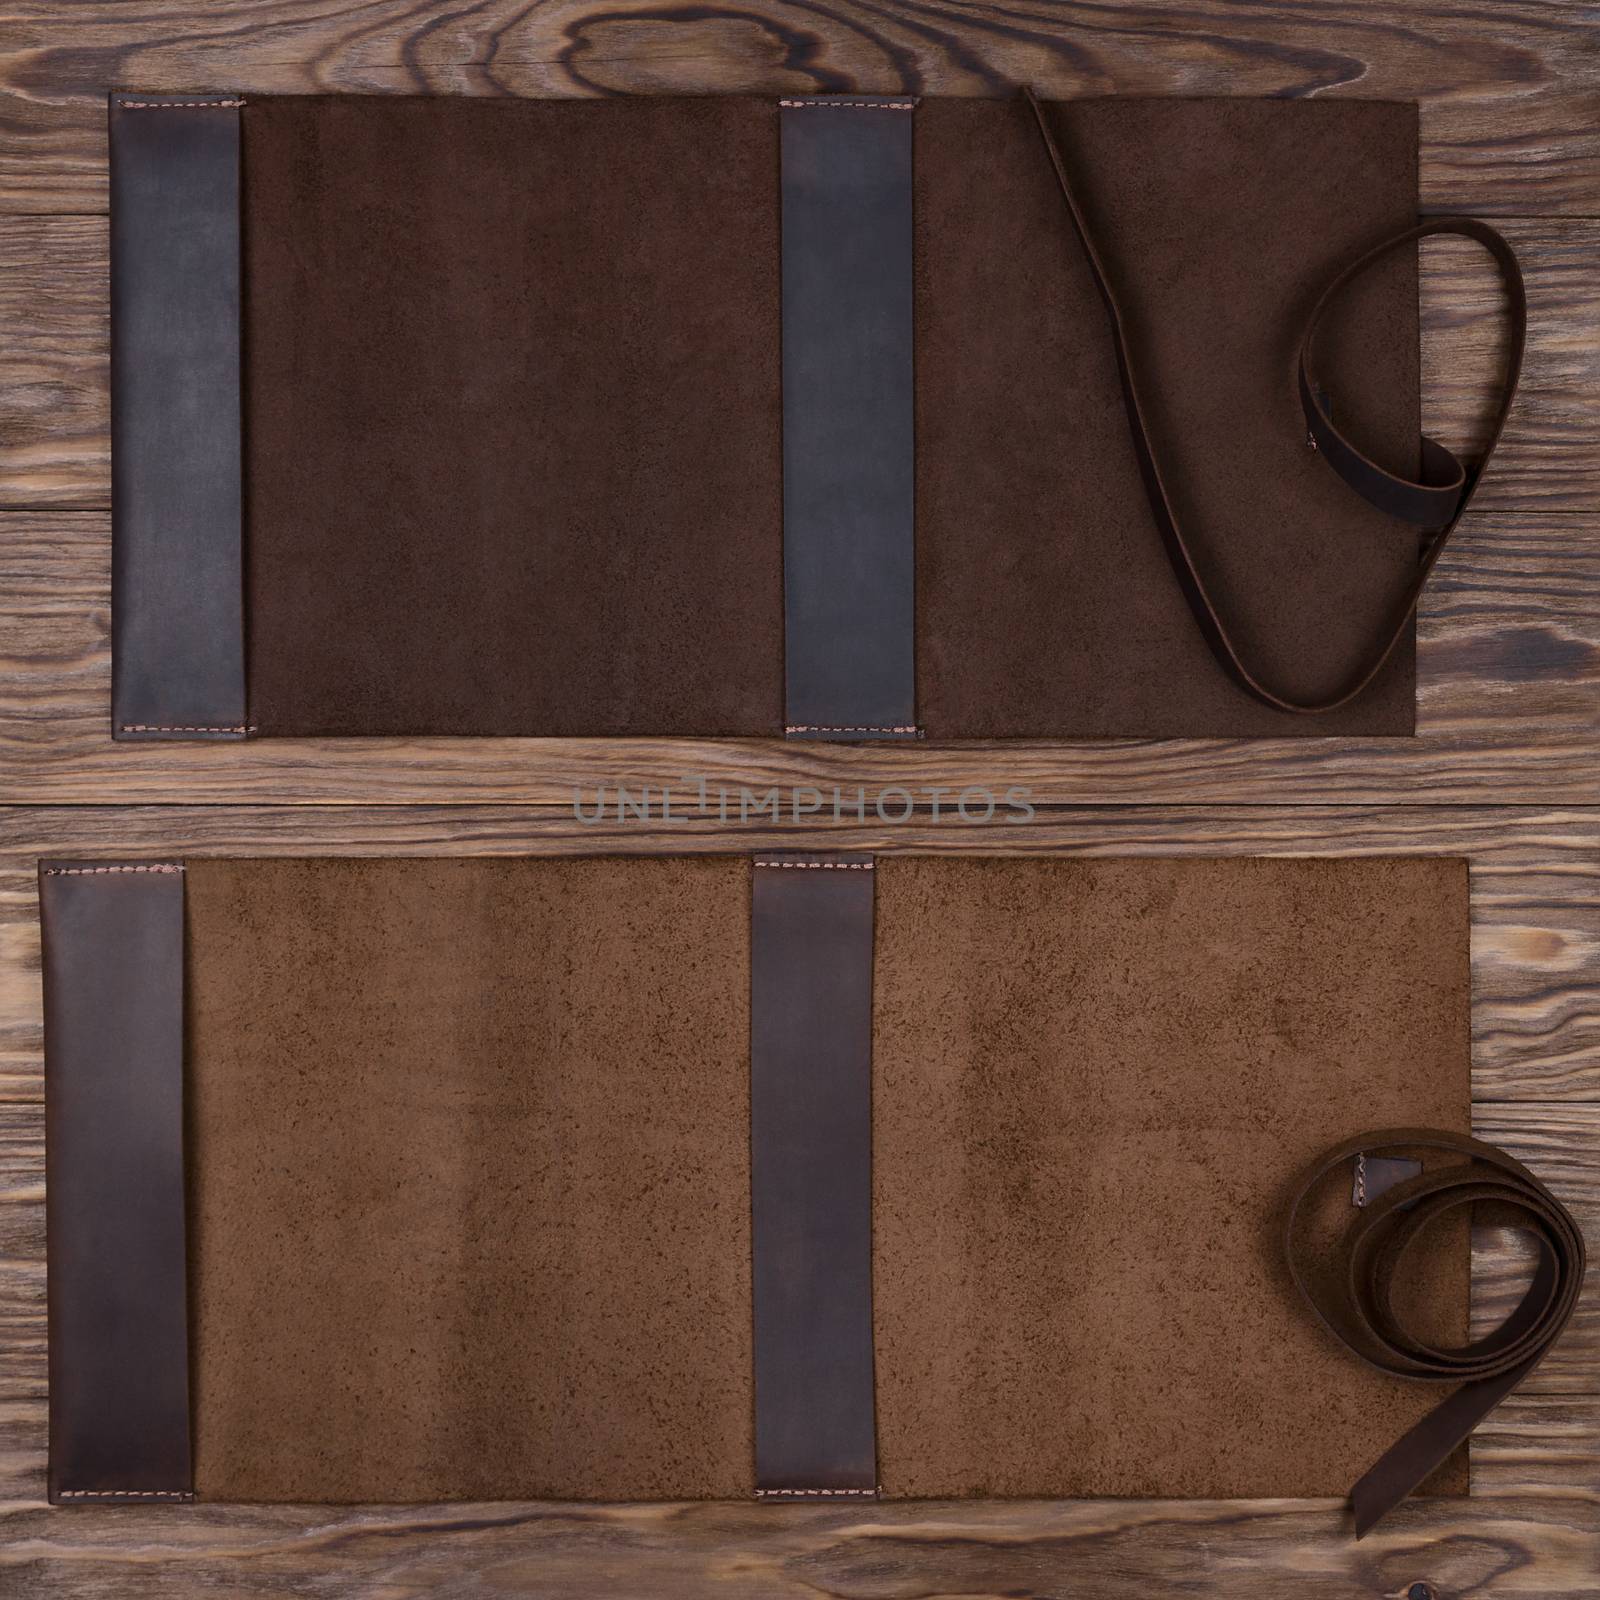 Two brown opened handmade leather notebook covers on wooden background. Stock photo of luxury business accessories.